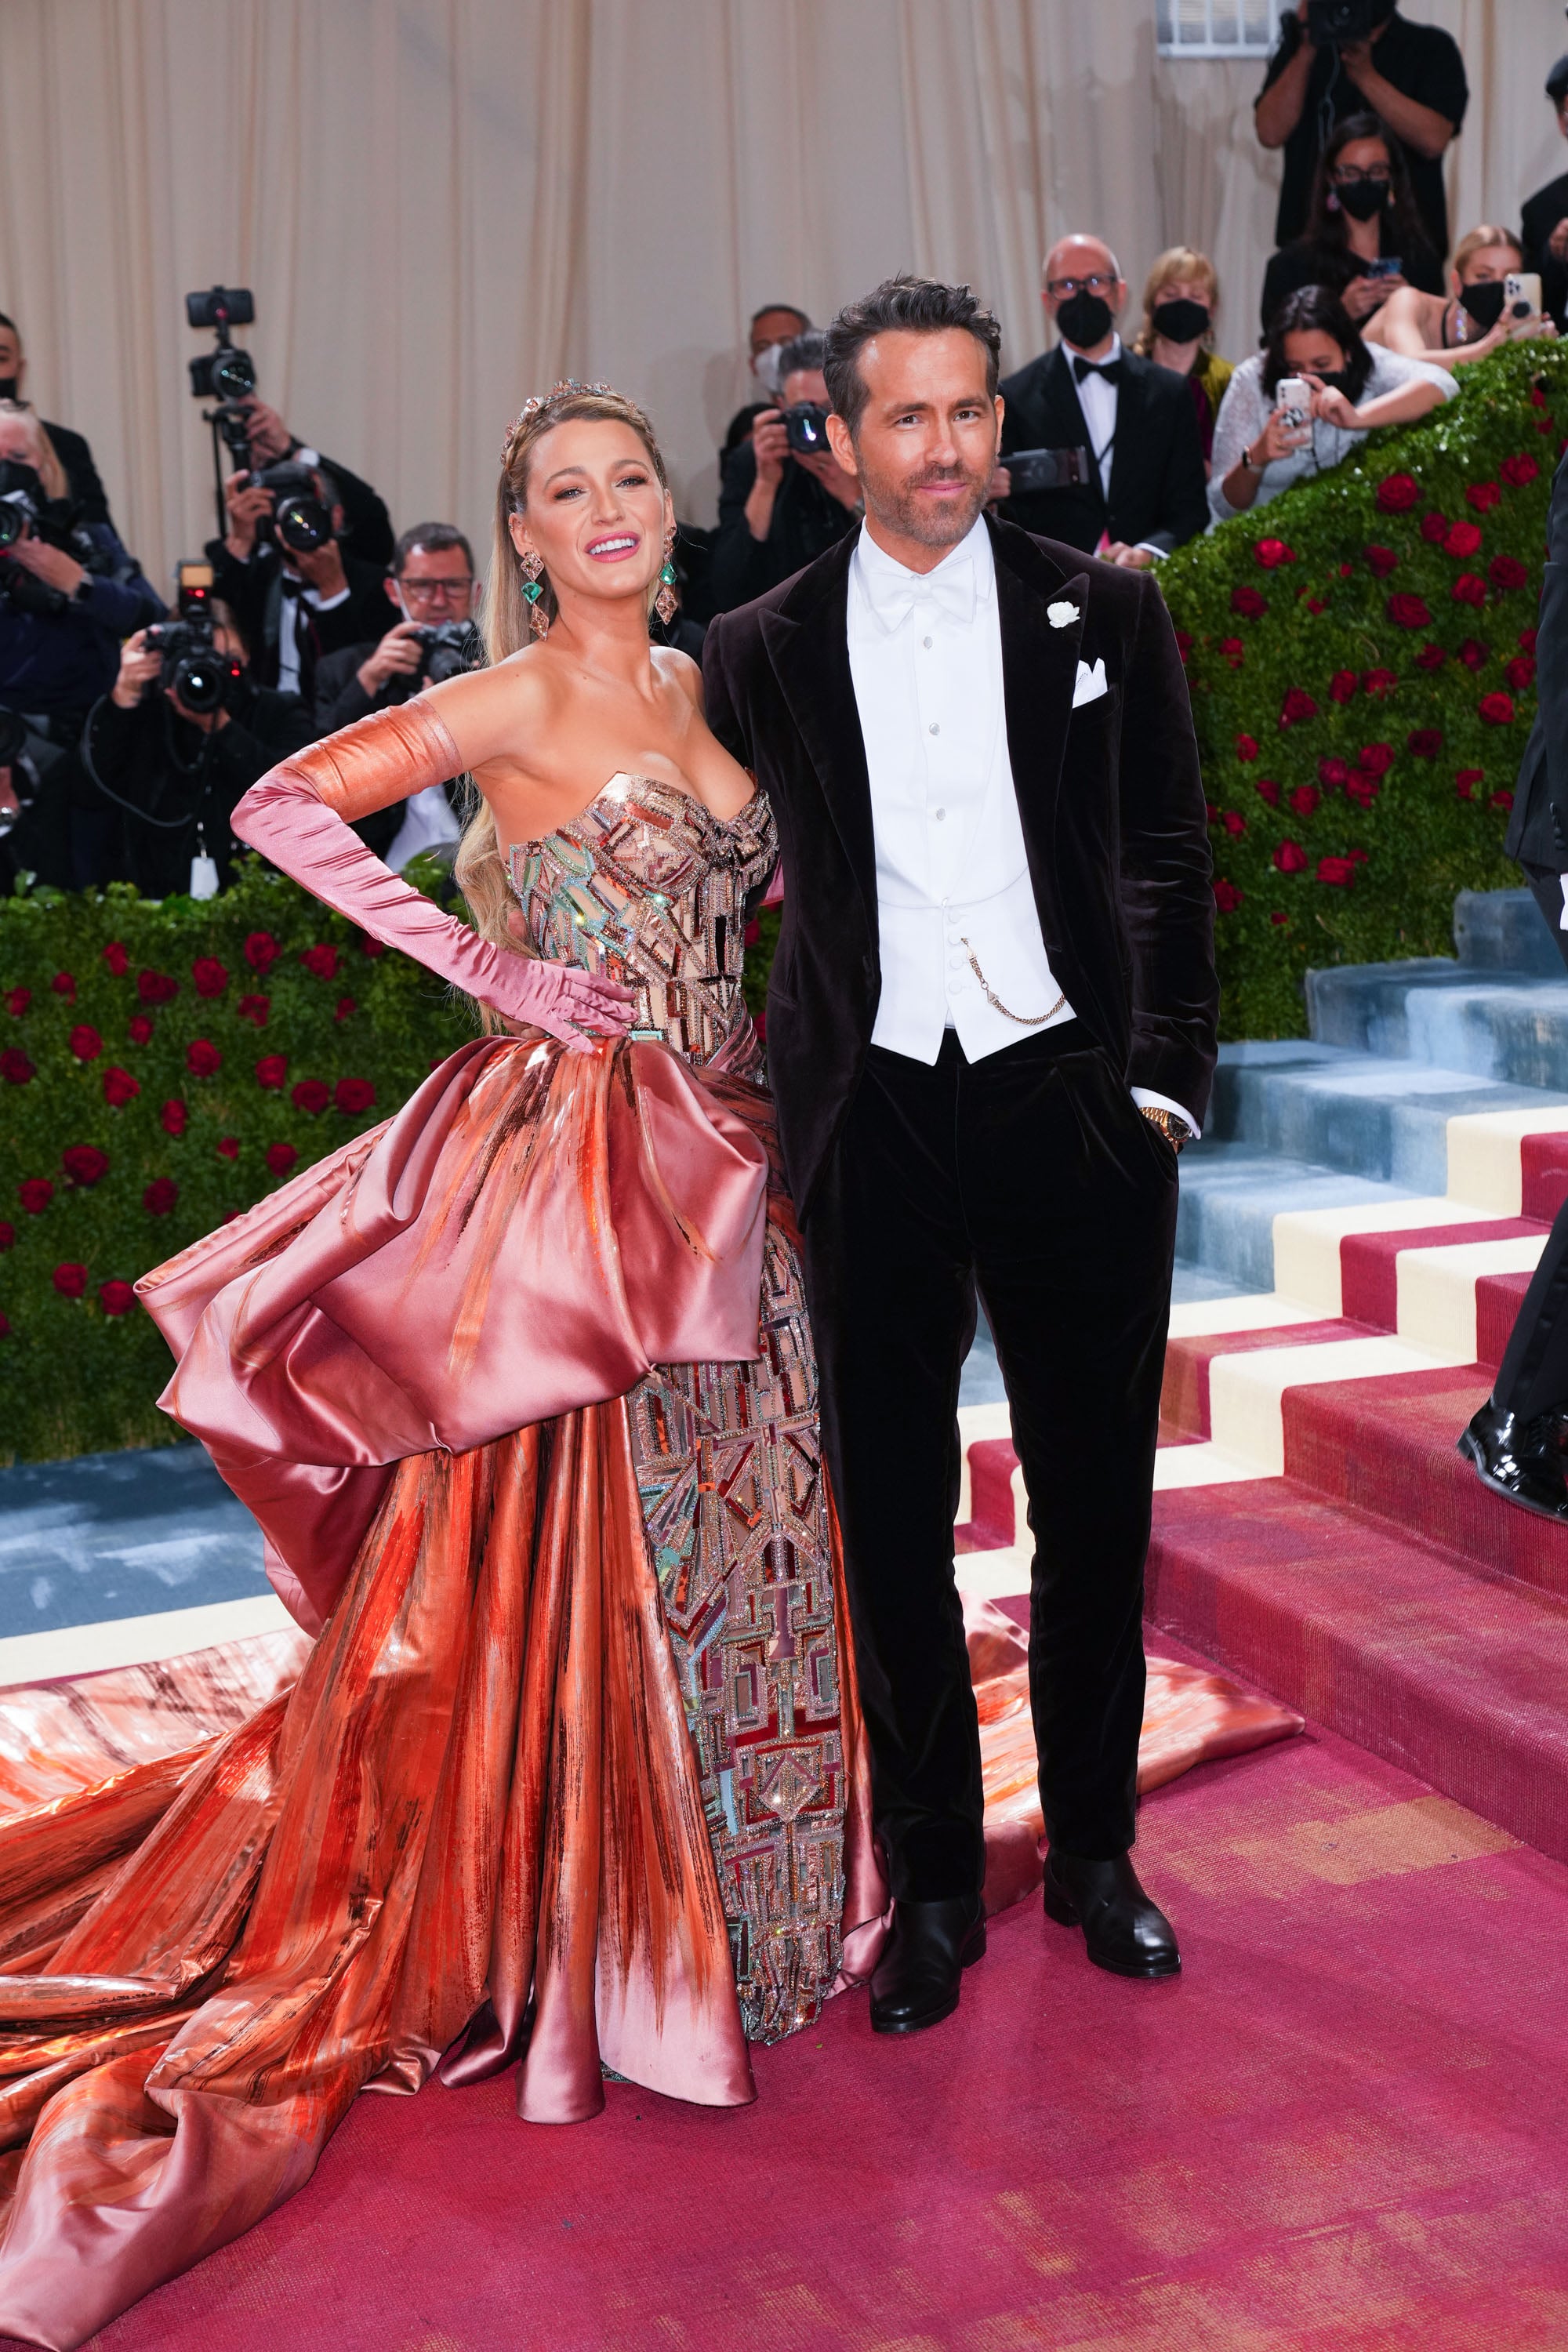 Why Is Blake Lively Not Going to the Met Gala? | POPSUGAR Celebrity UK